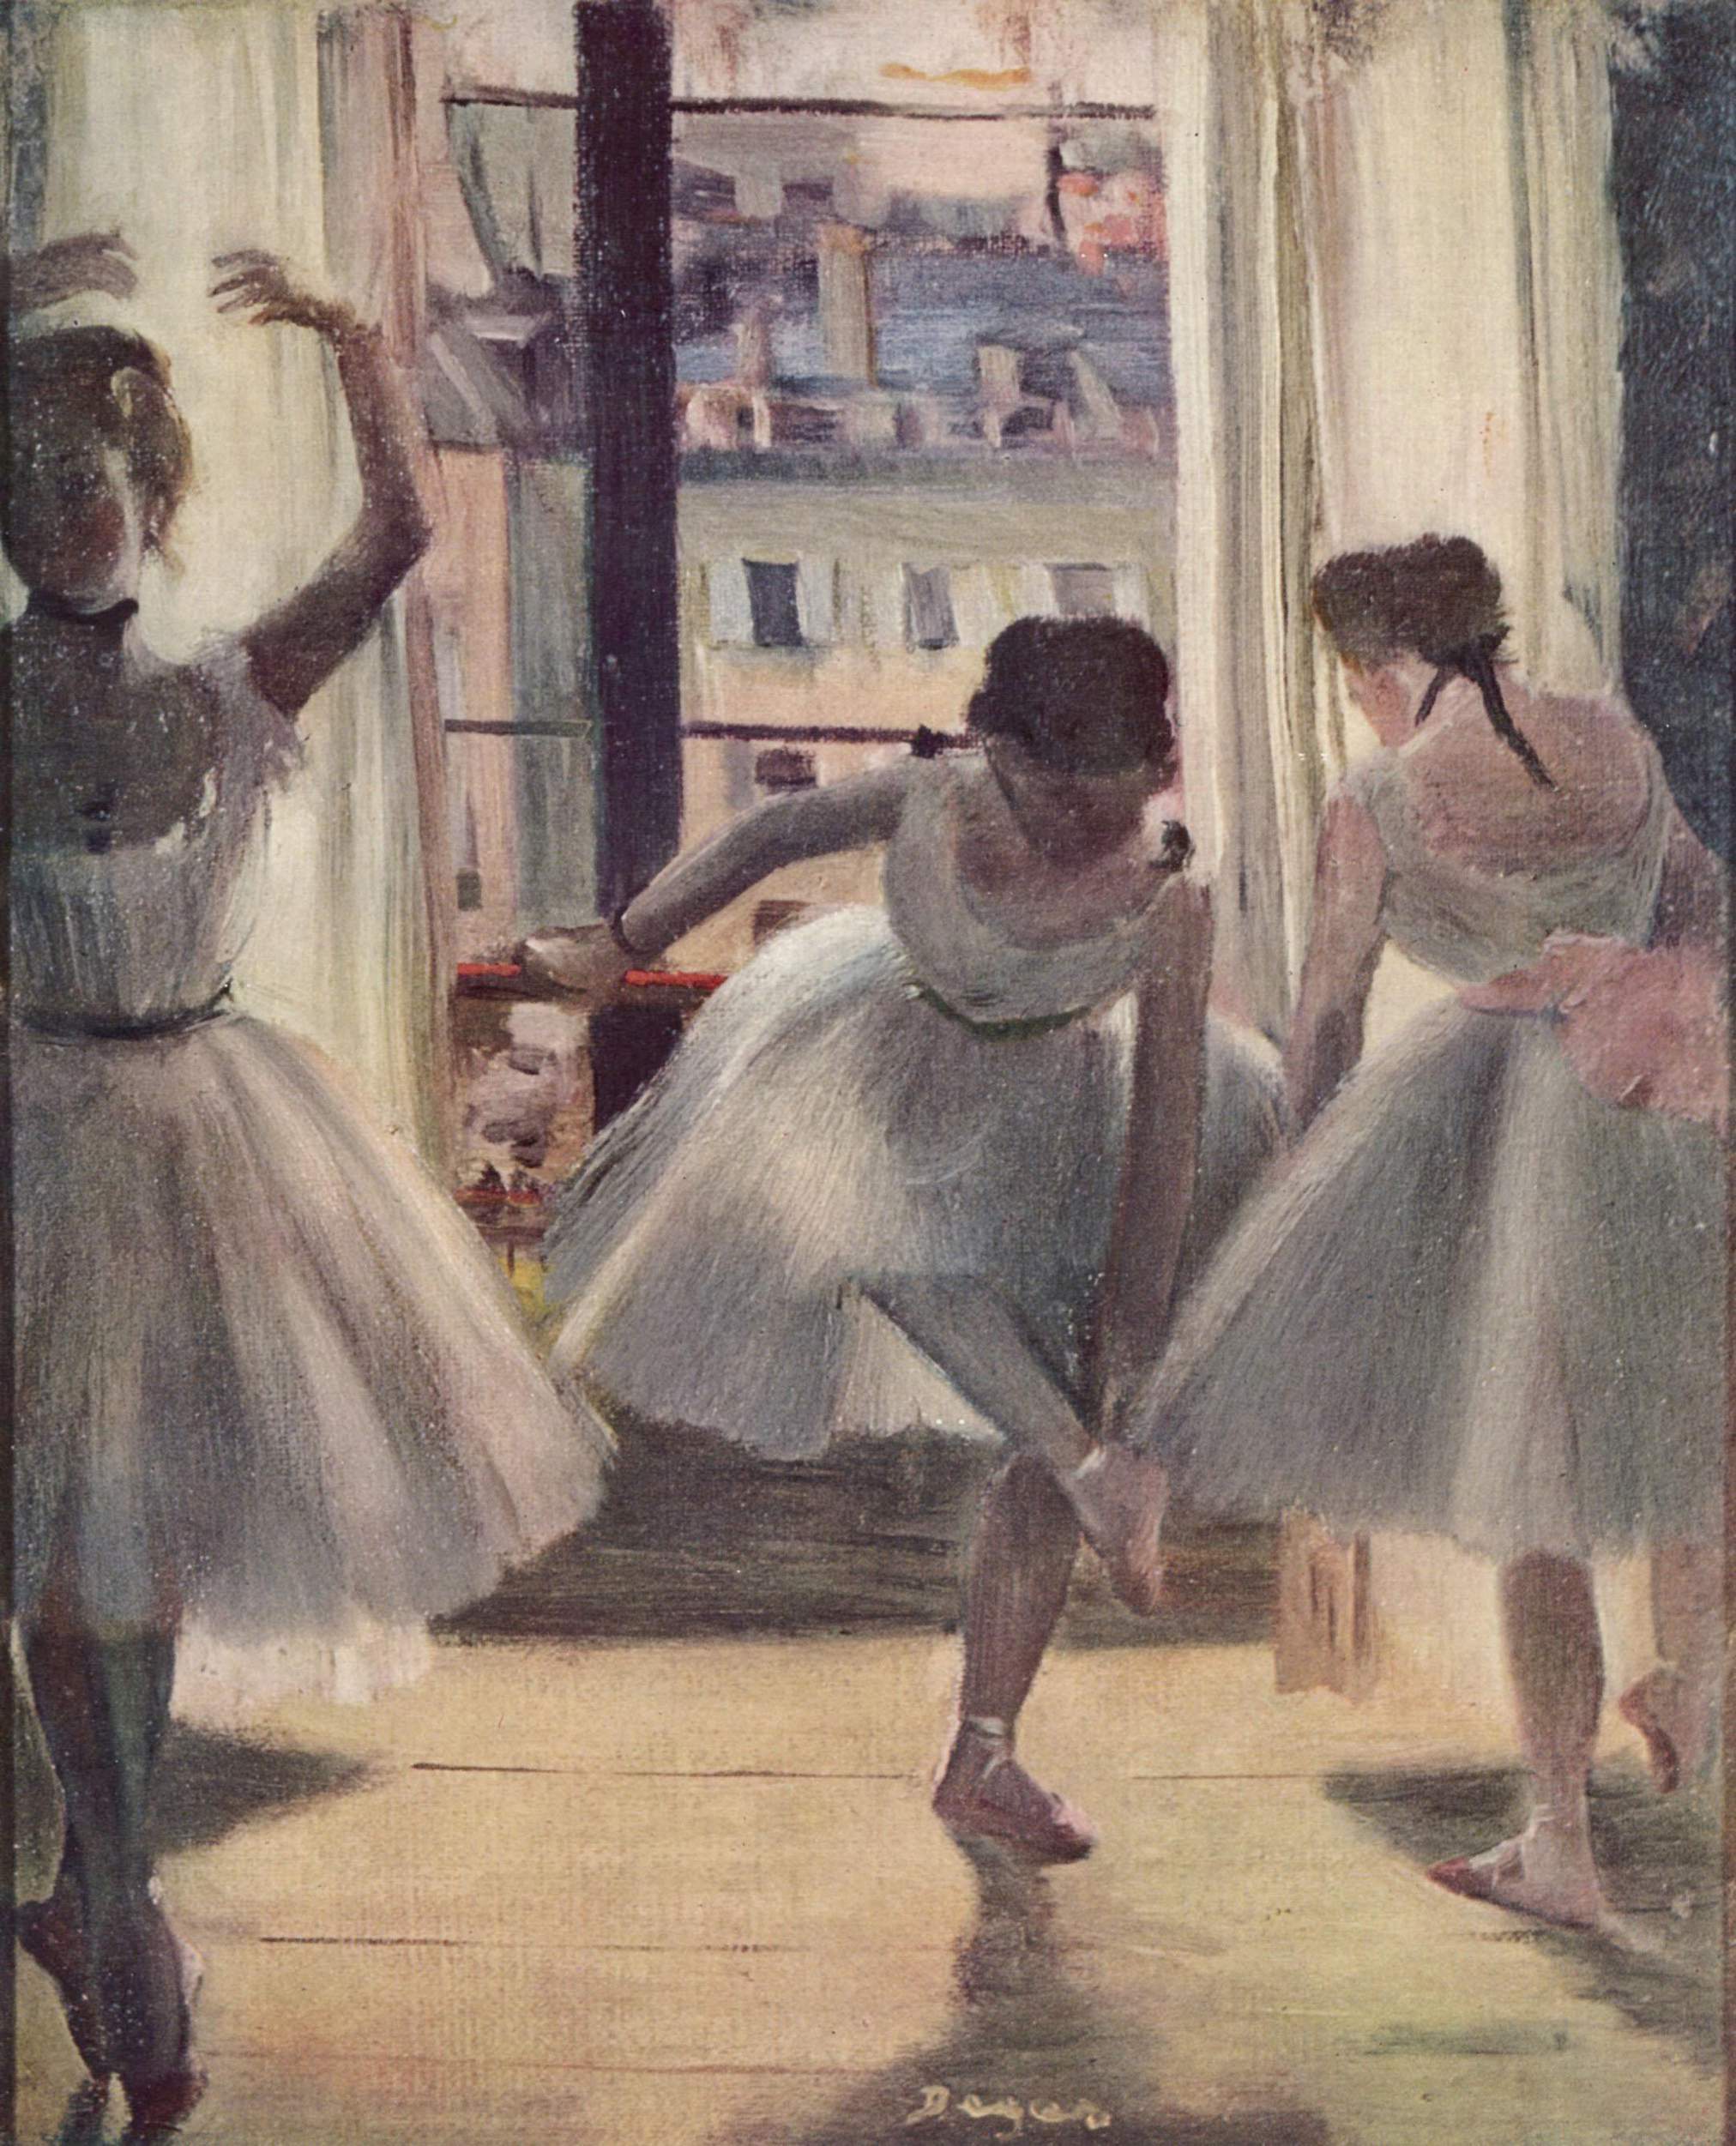 Three Dancers in an Exercise Hall by Edgar Degas - 1880 - - private collection